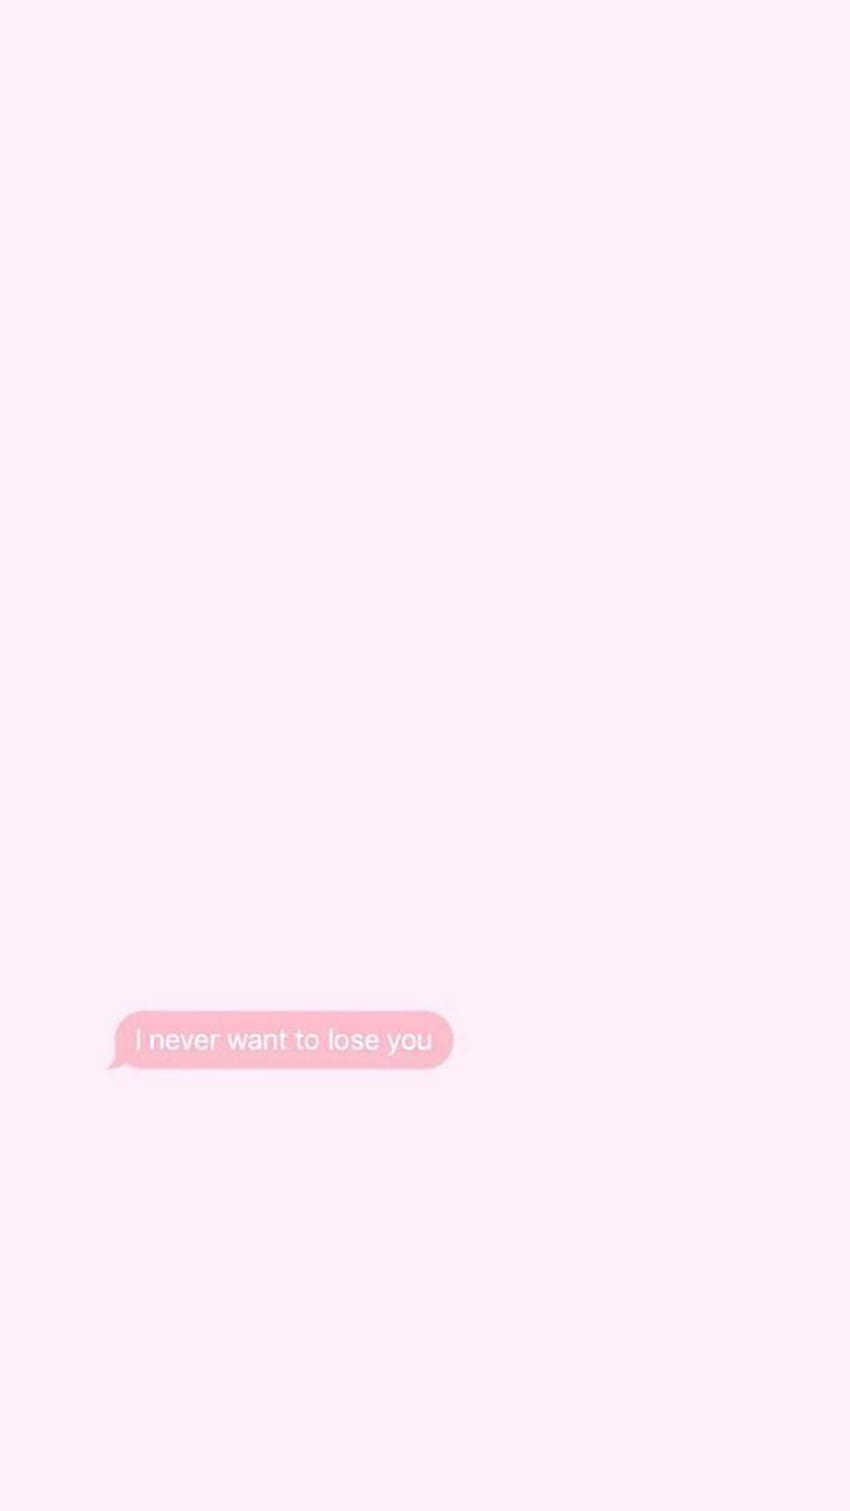 A pink phone background with a text bubble that says 